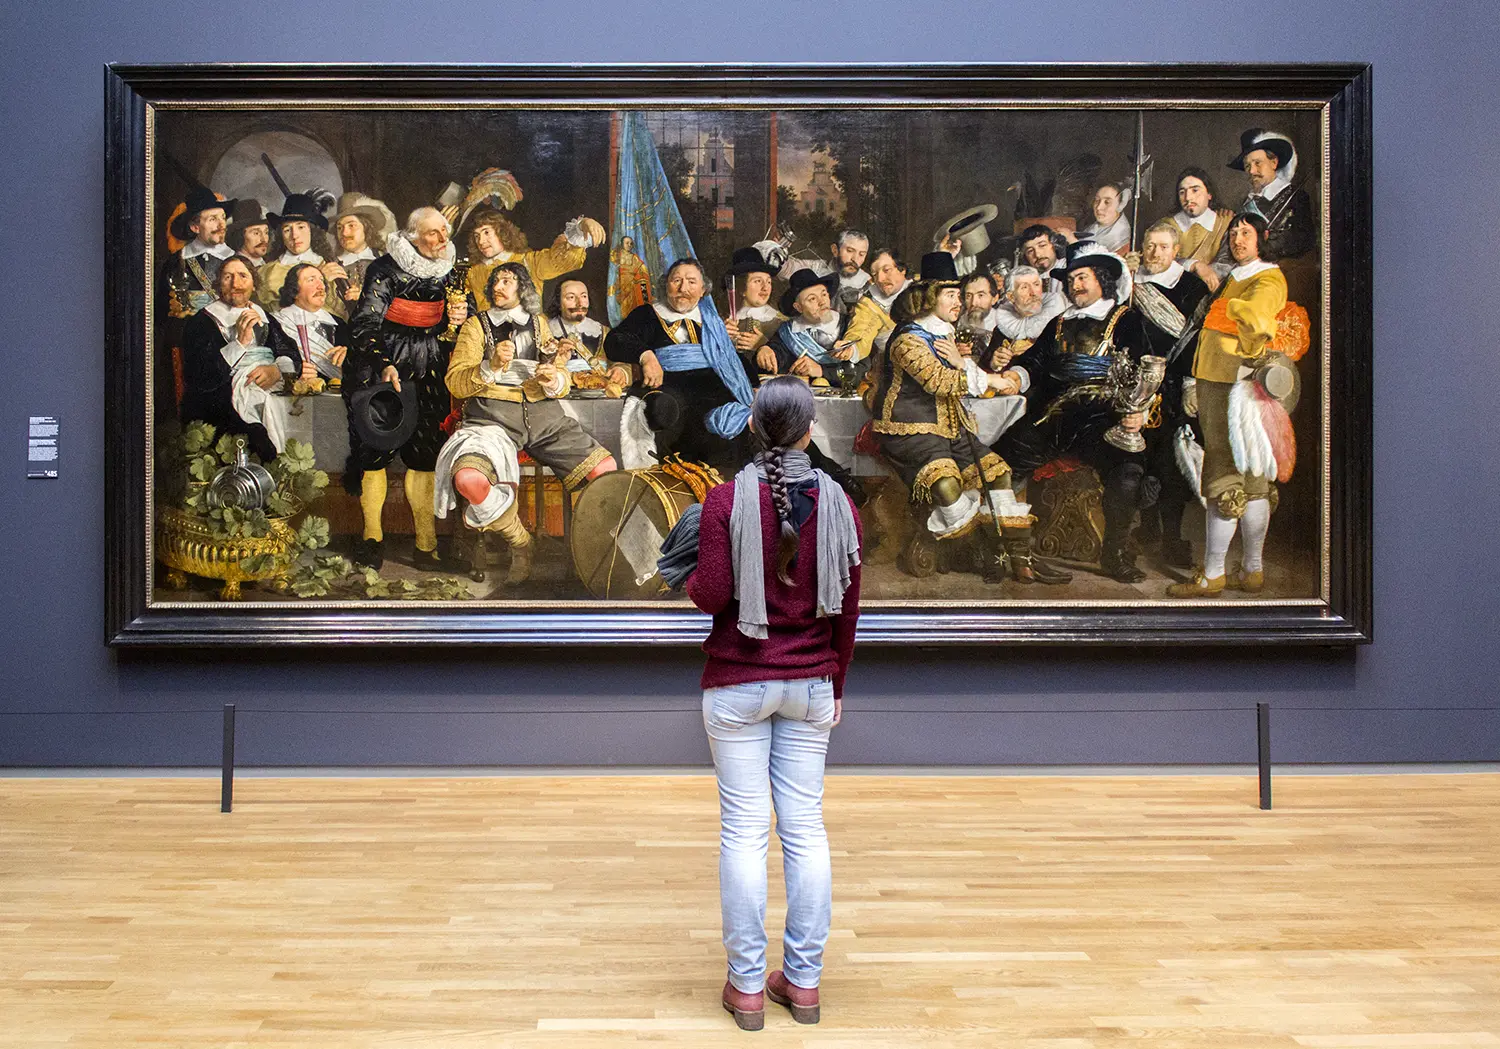 Visitor admiring painting at the Rijksmuseum in Amsterdam